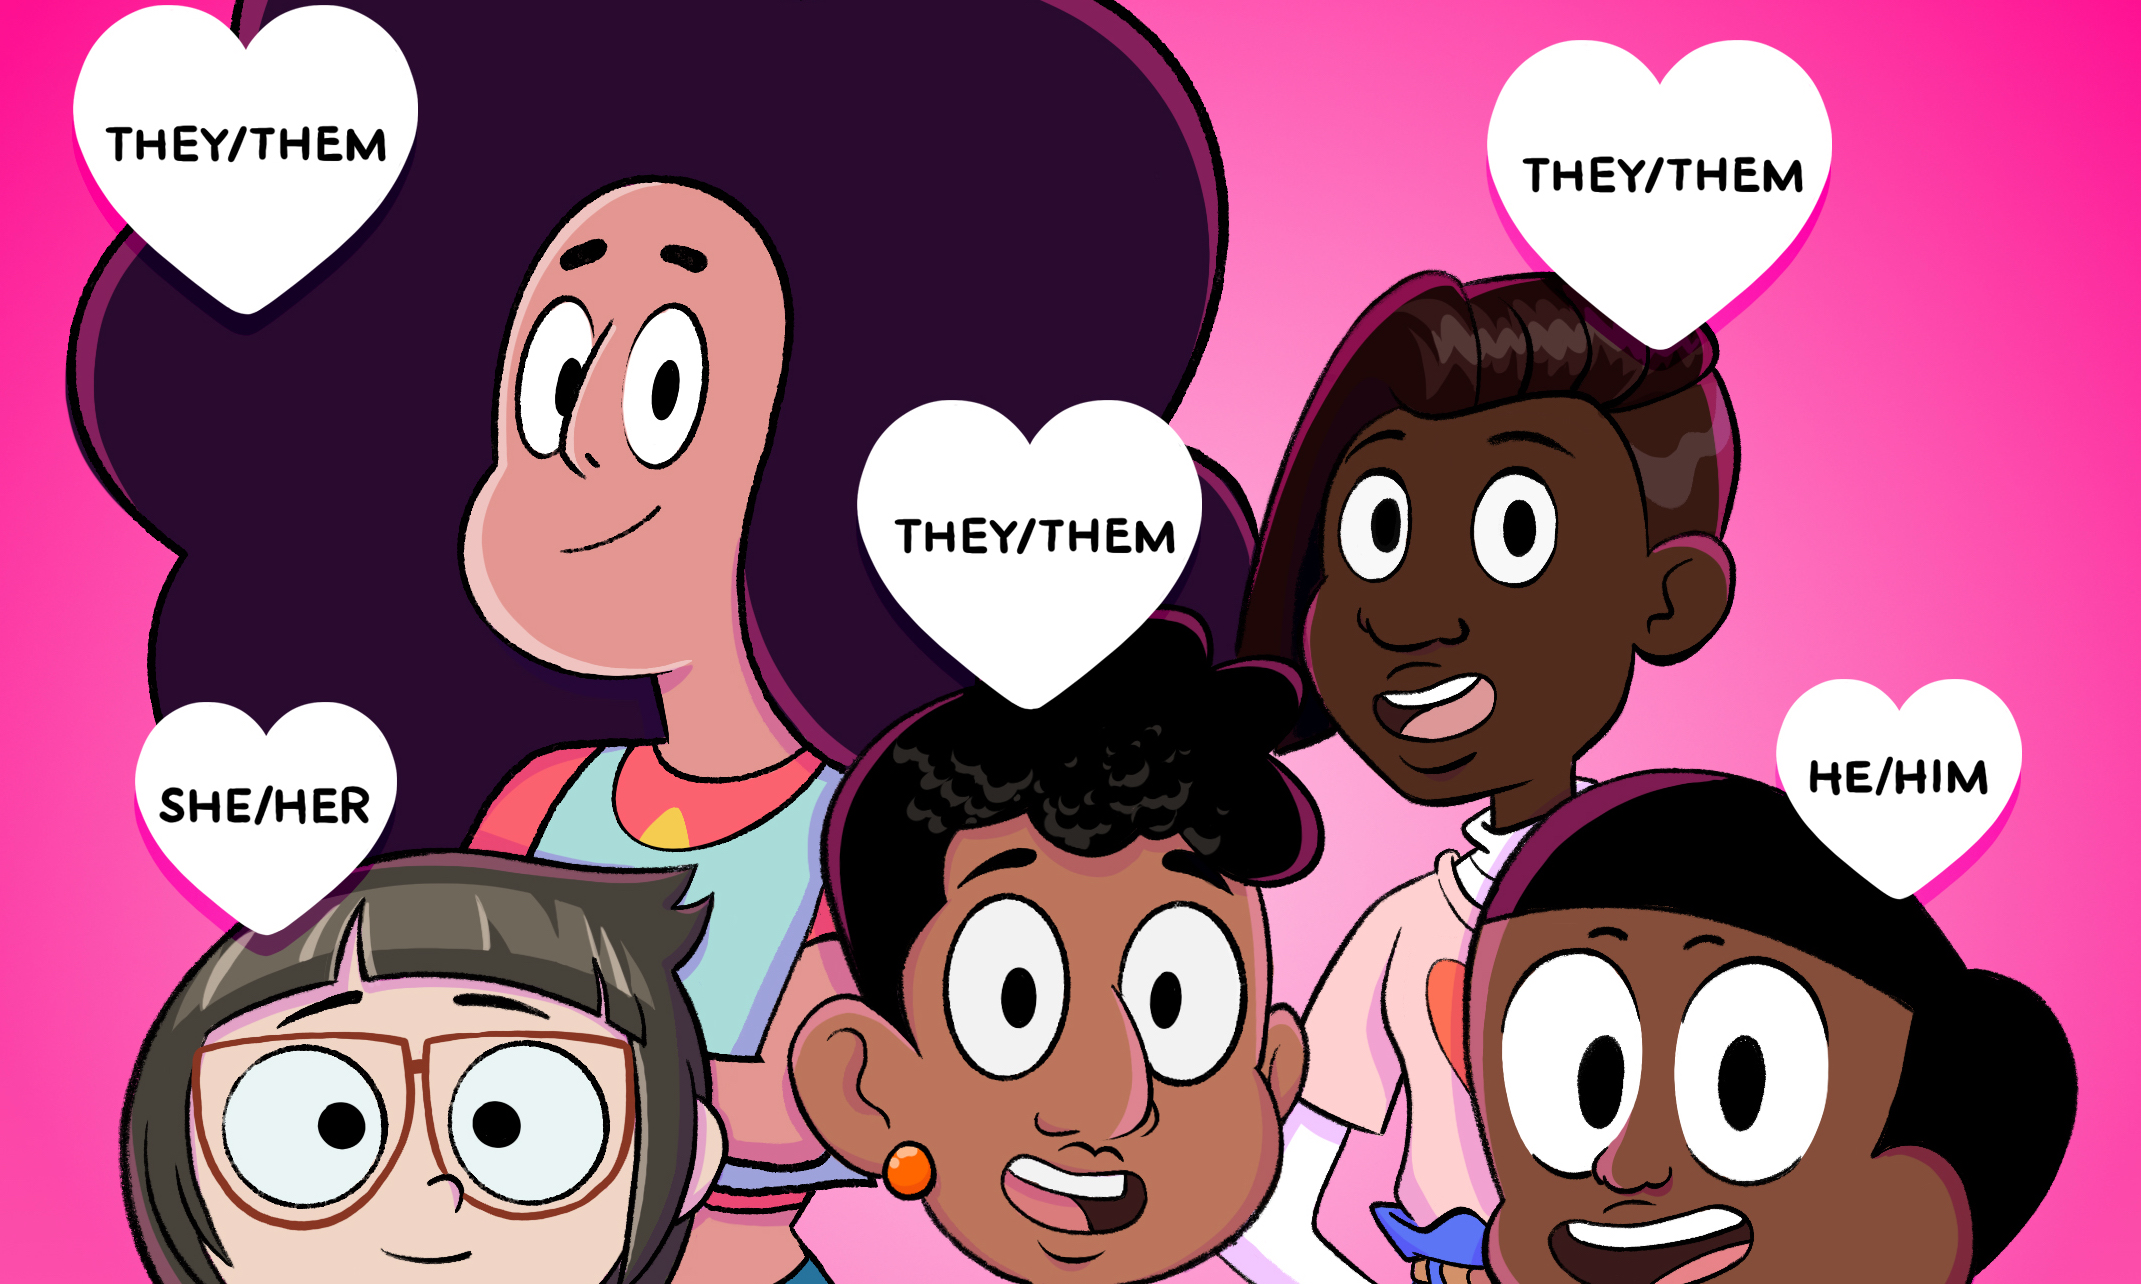 Cartoon Collab Centers Black Trans and Non-Binary Youth - Ms. Magazine